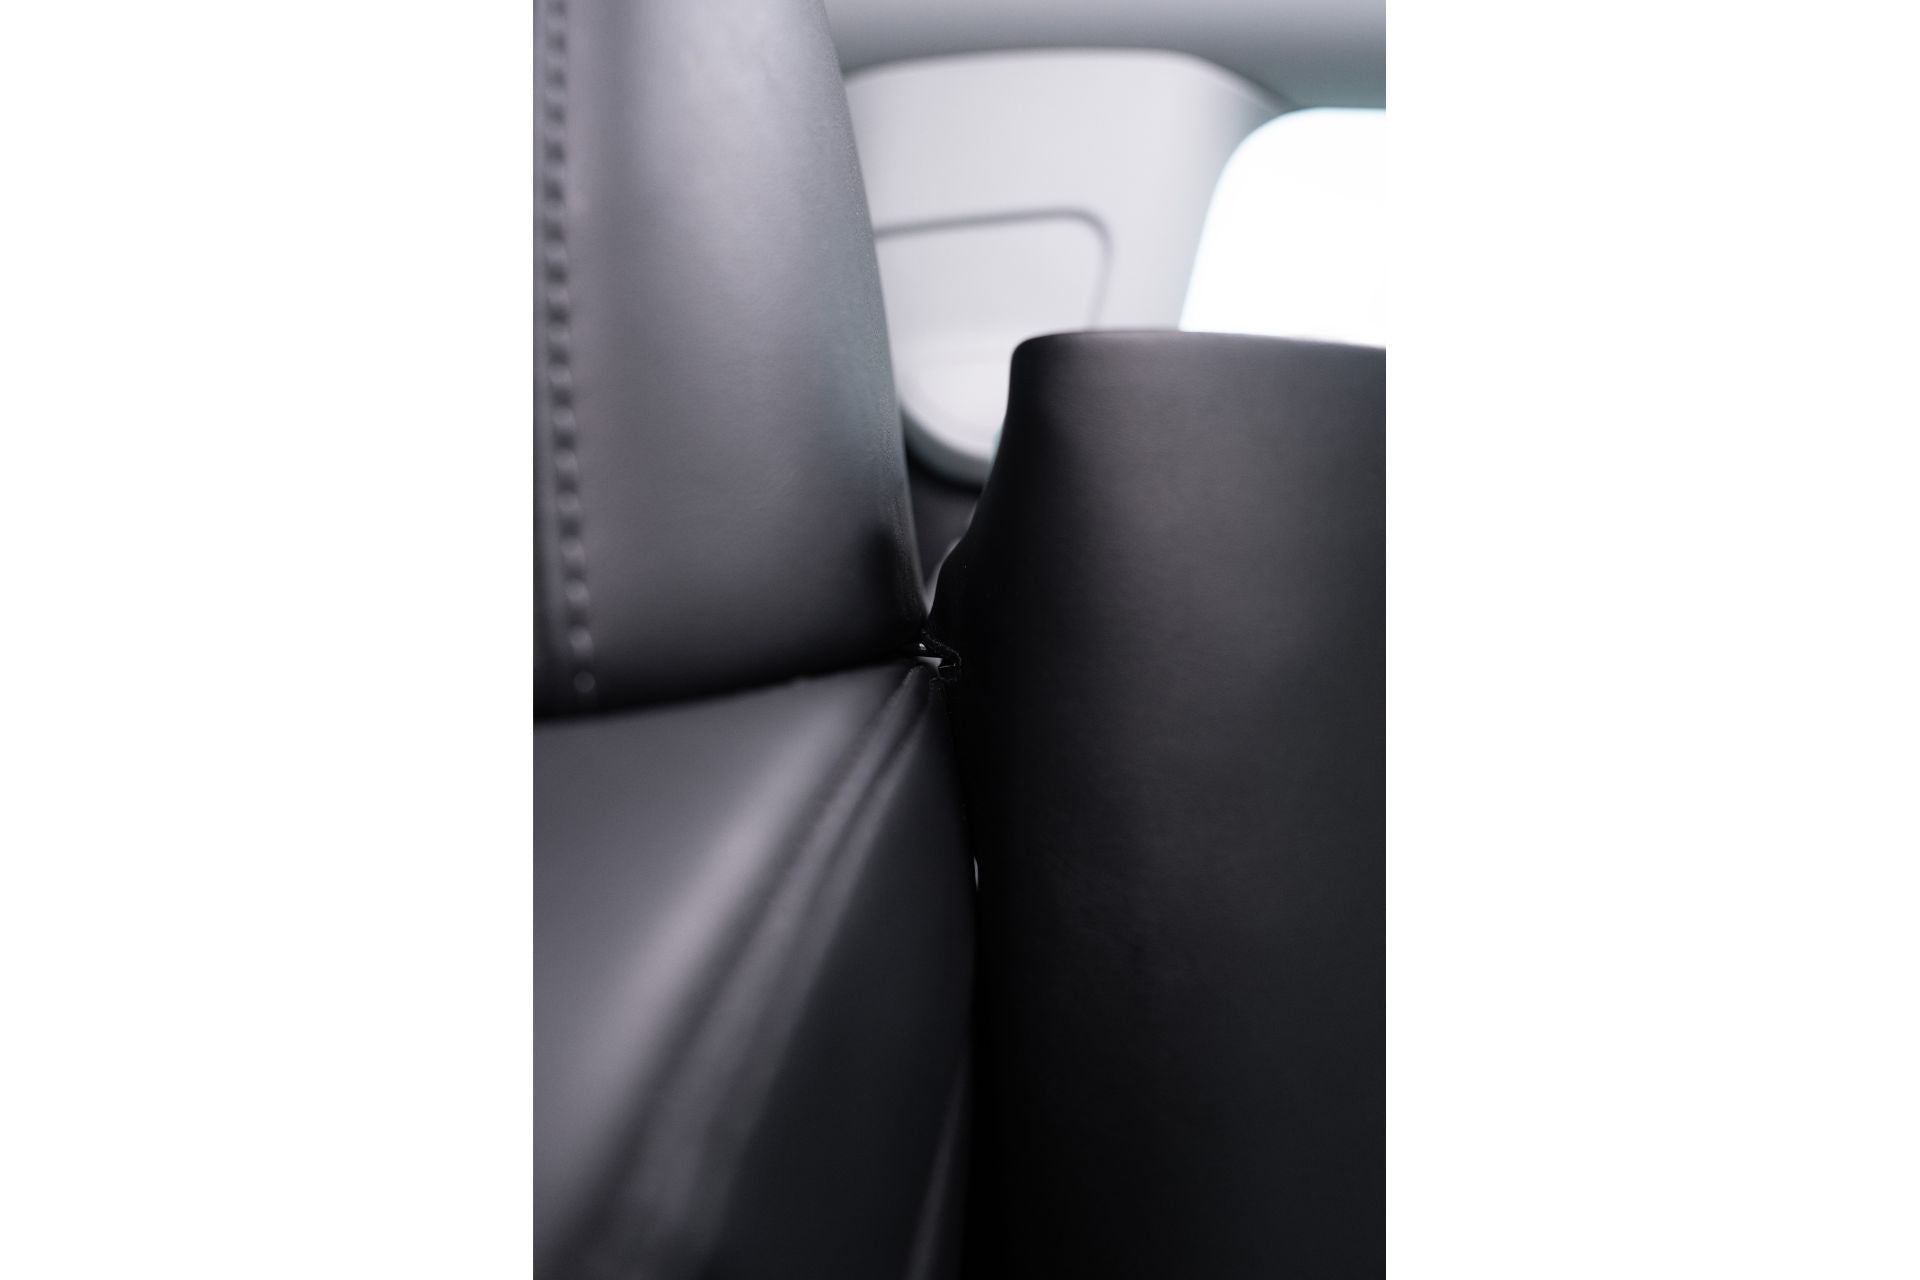 MagSafe Tissue Box behind driver seat black color